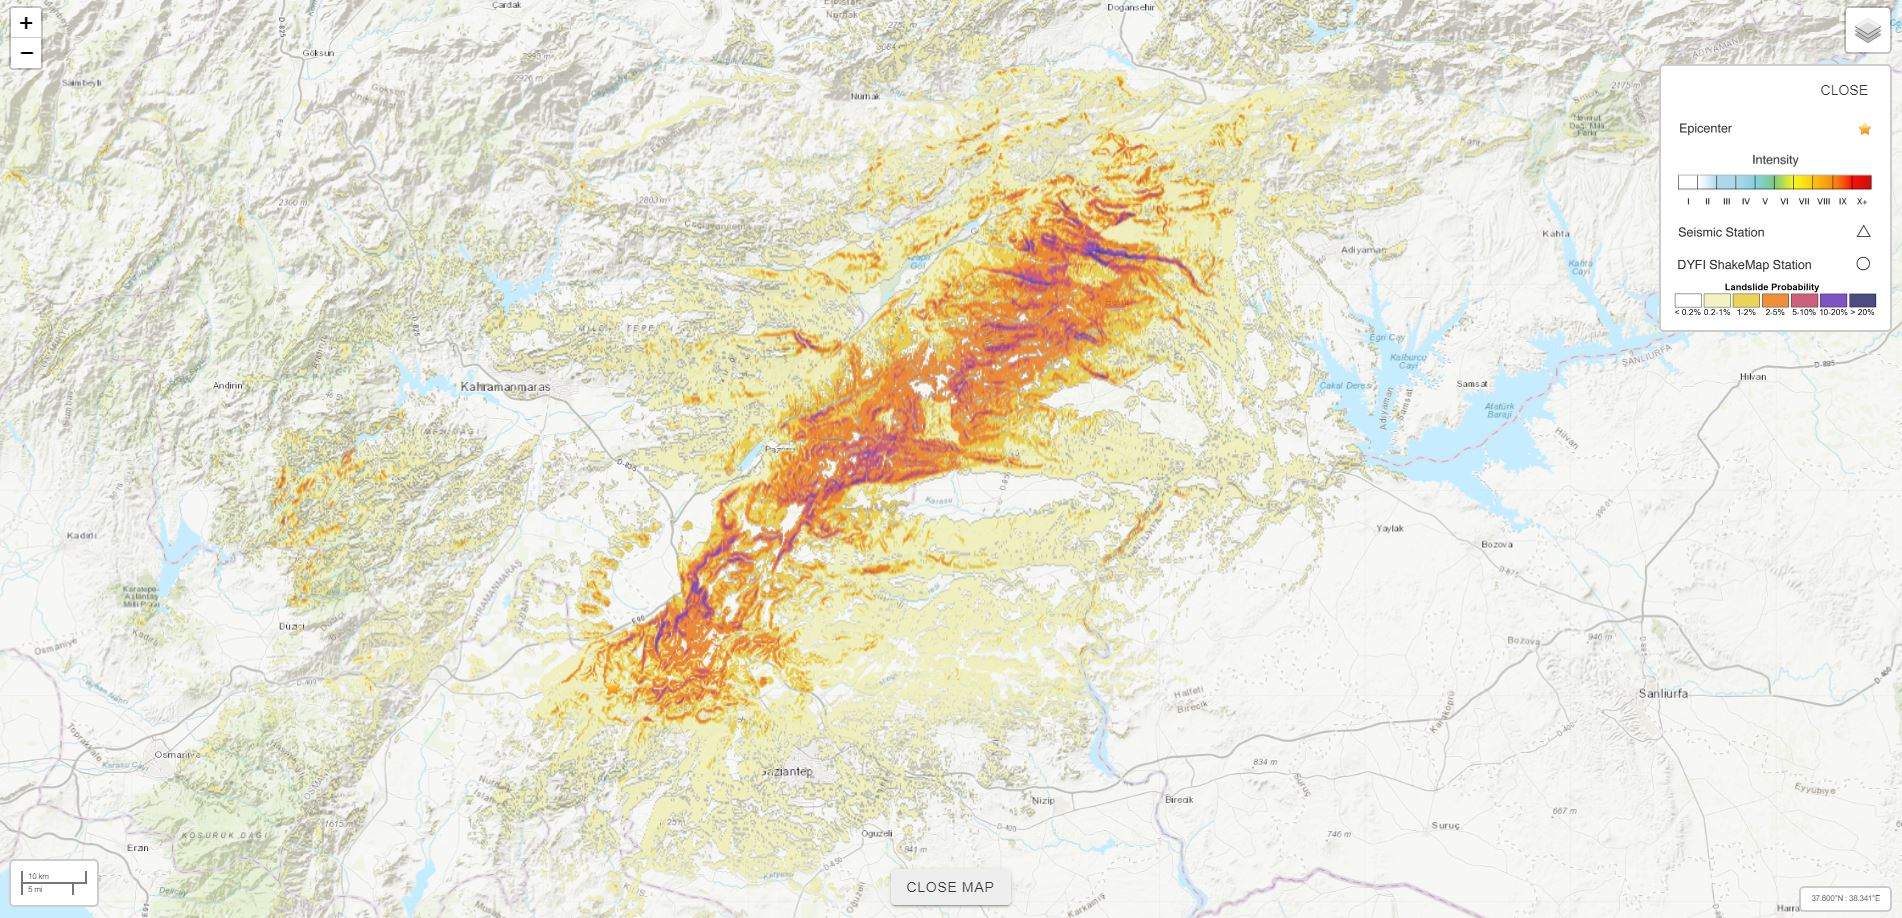 USGS landslide probability map for the 6 February 2023 Turkey-Syria earthquake.